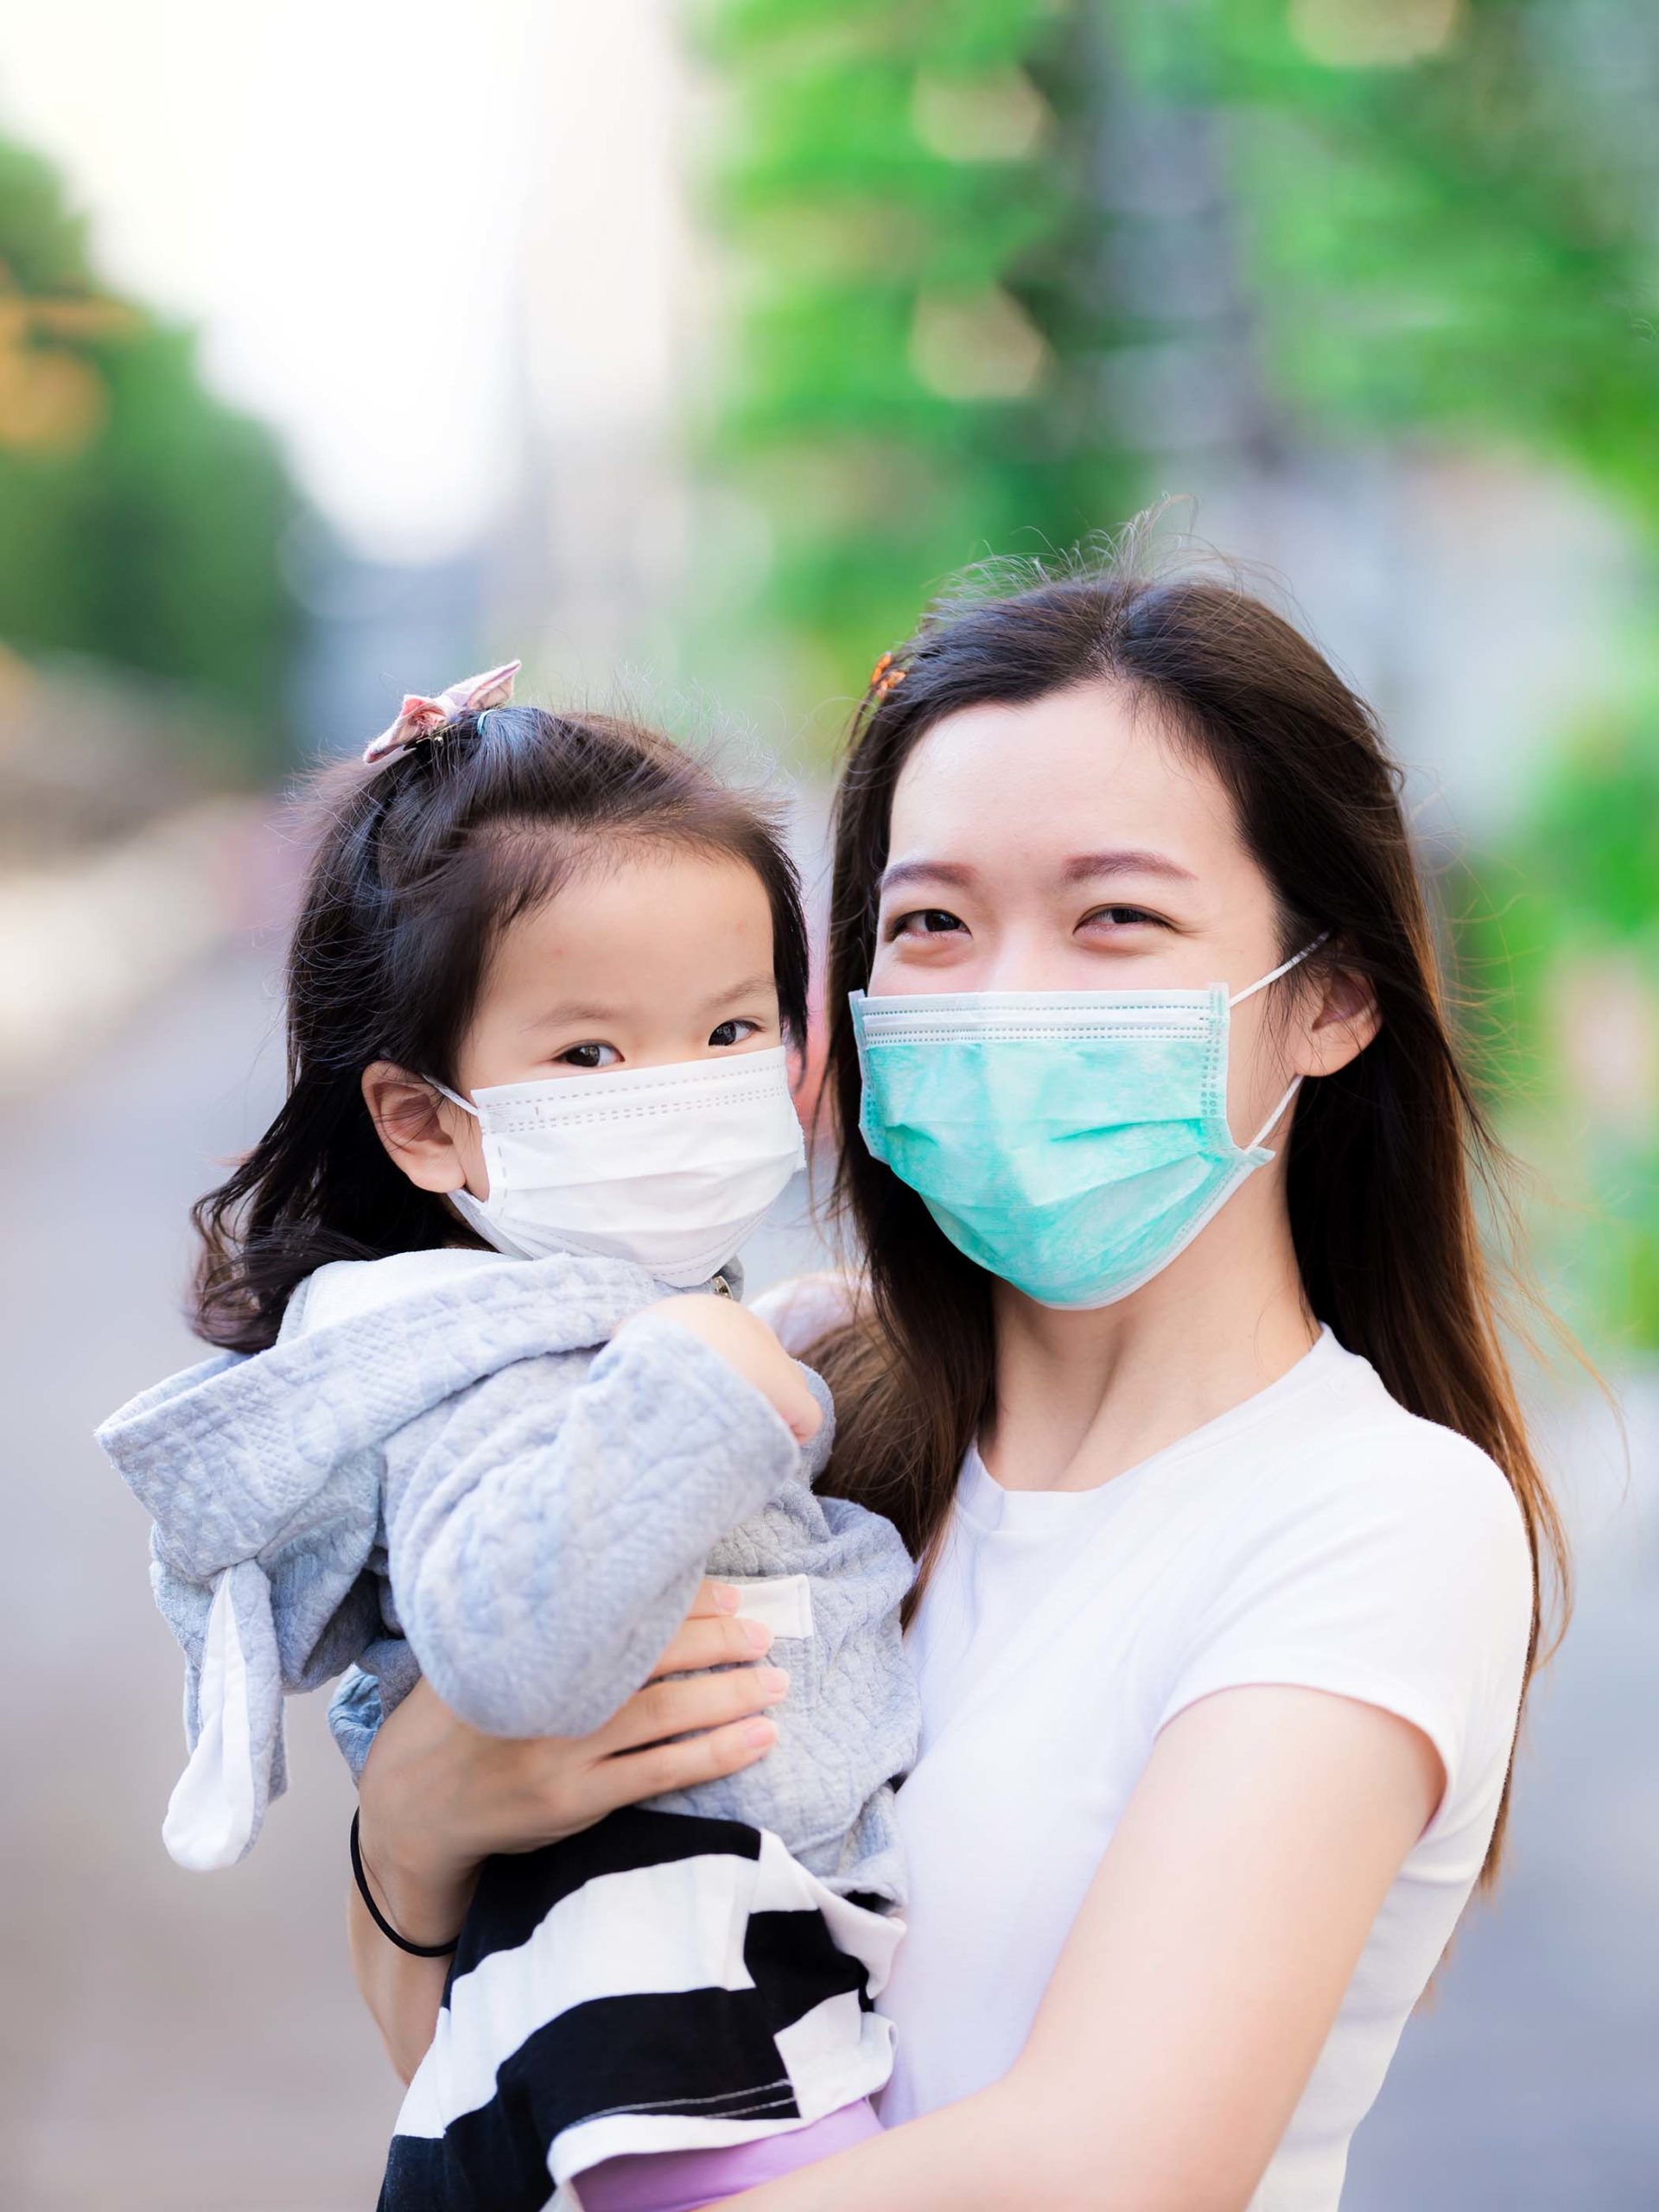 Mom and her daughter smiling outside with masks on